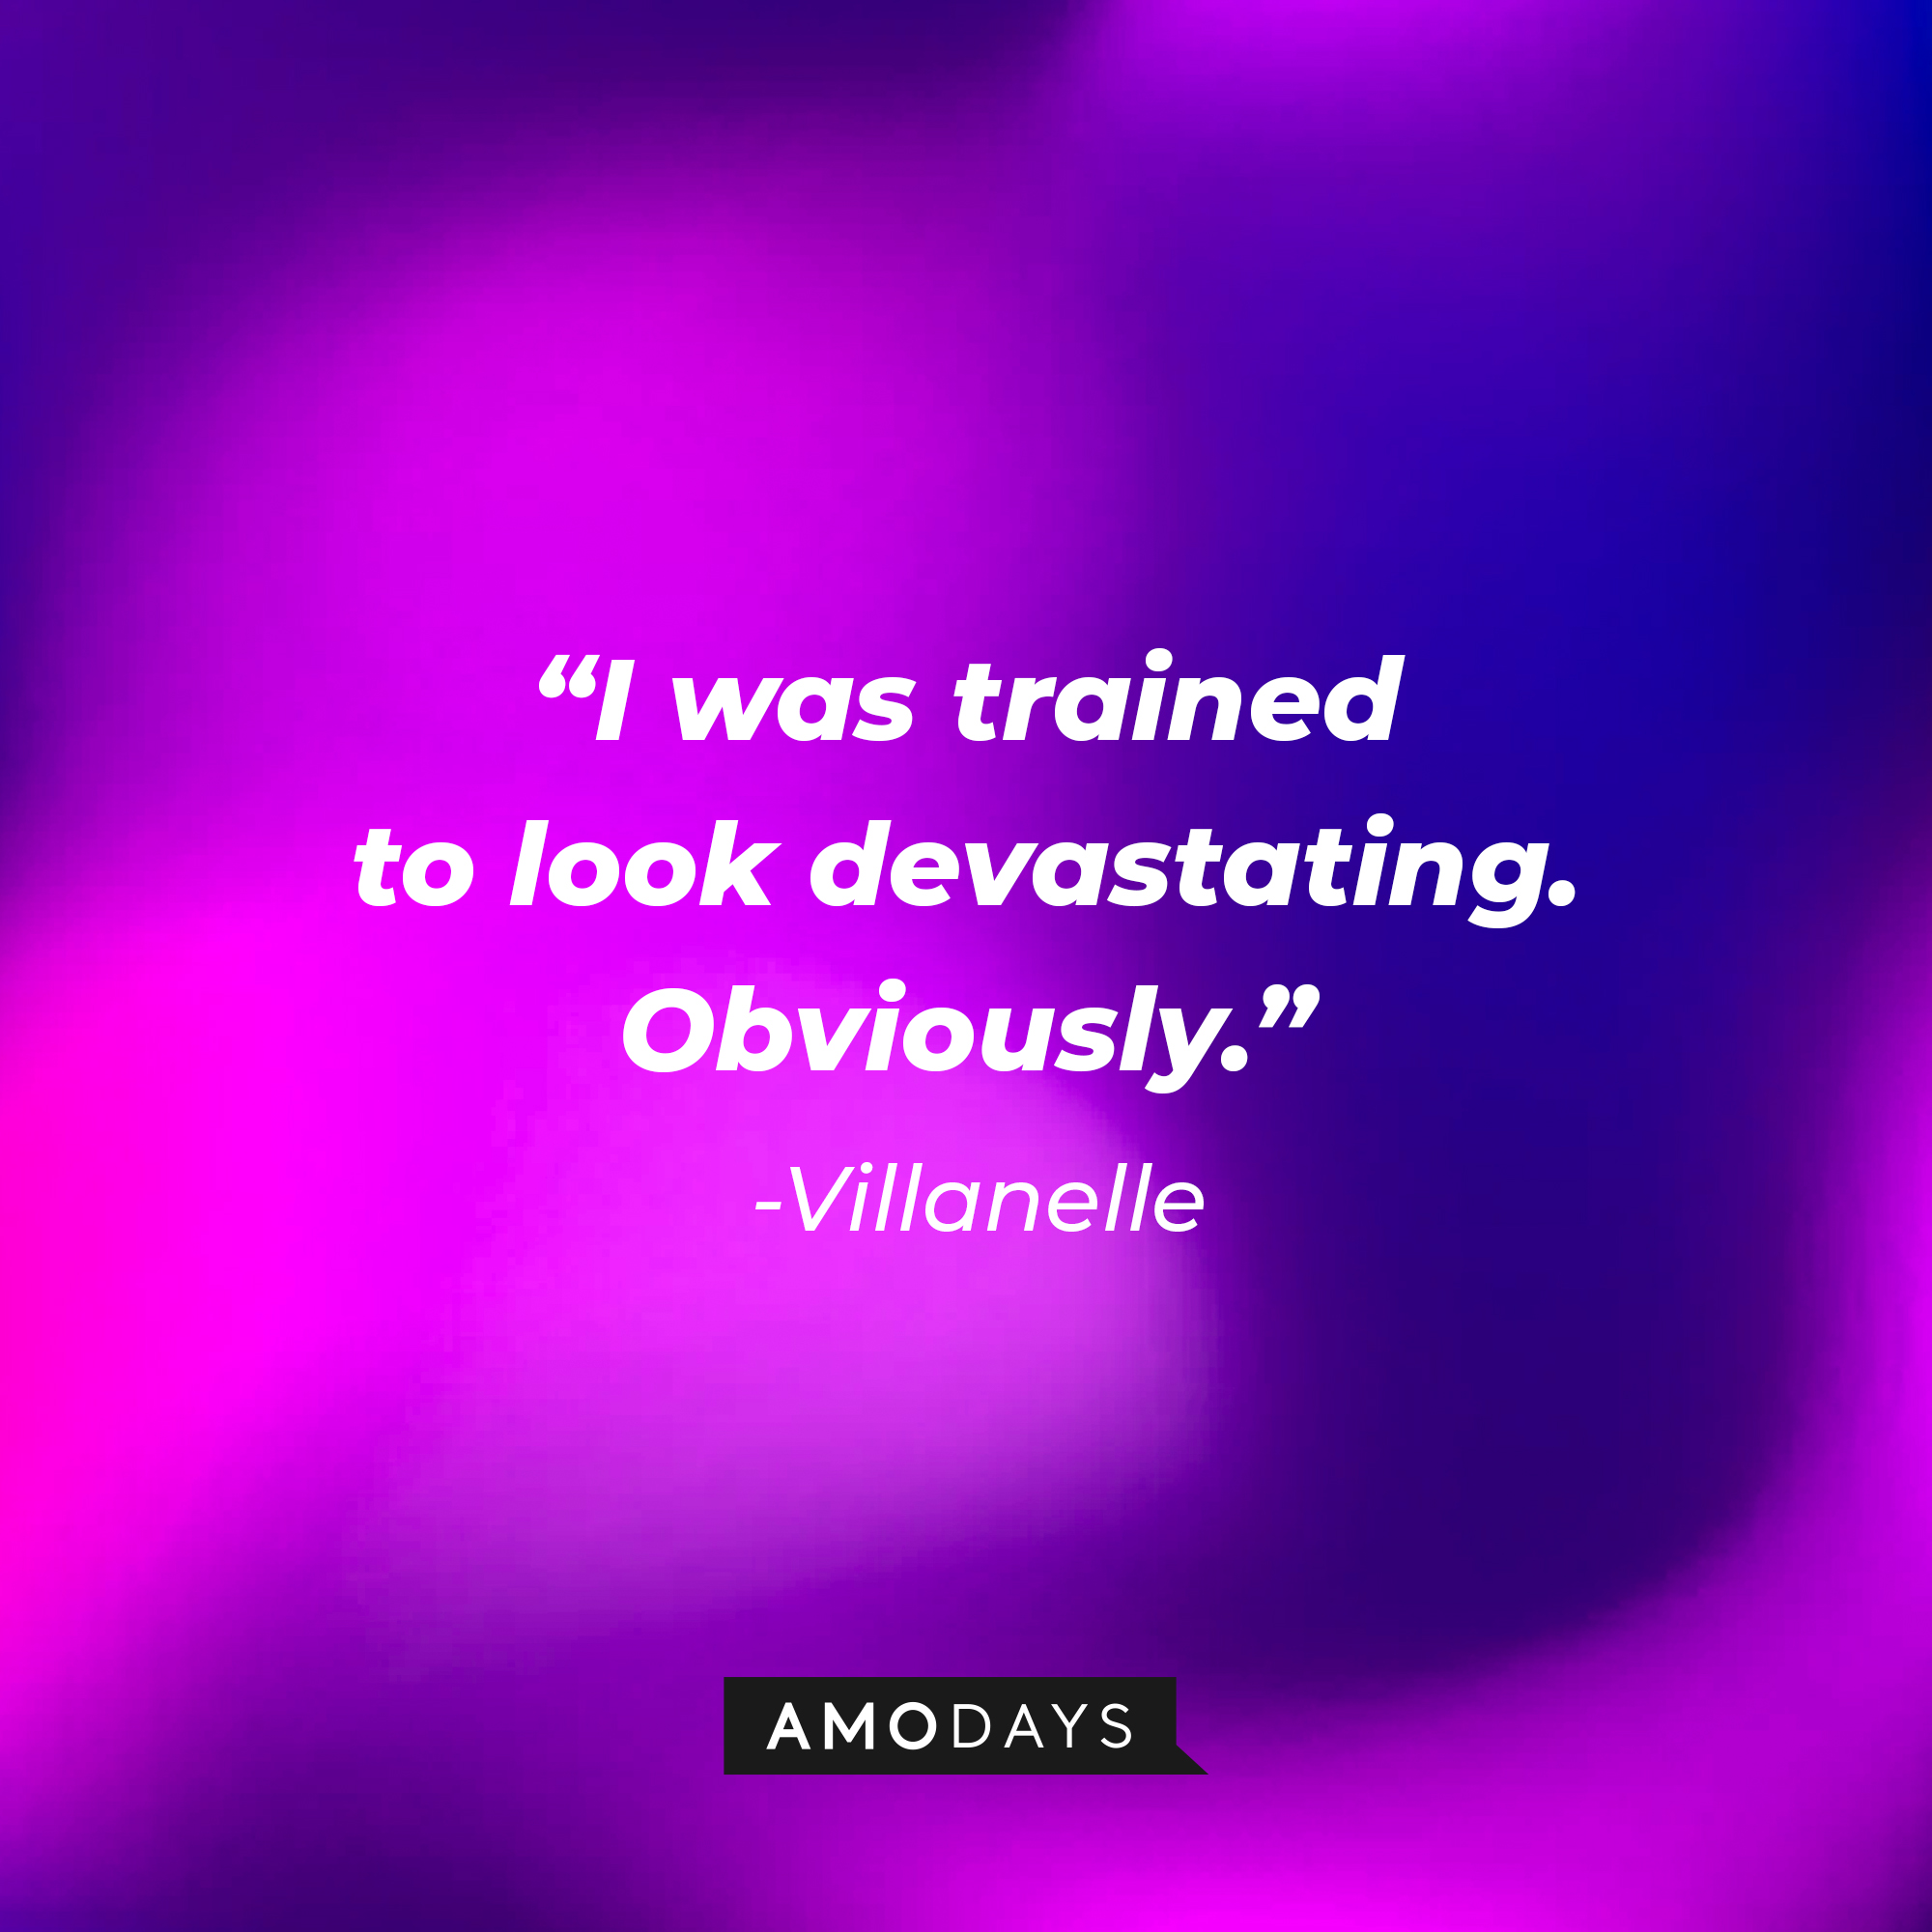 Villanelle‘s quote: “I was trained to look devastating. Obviously.” | Source: AmoDays